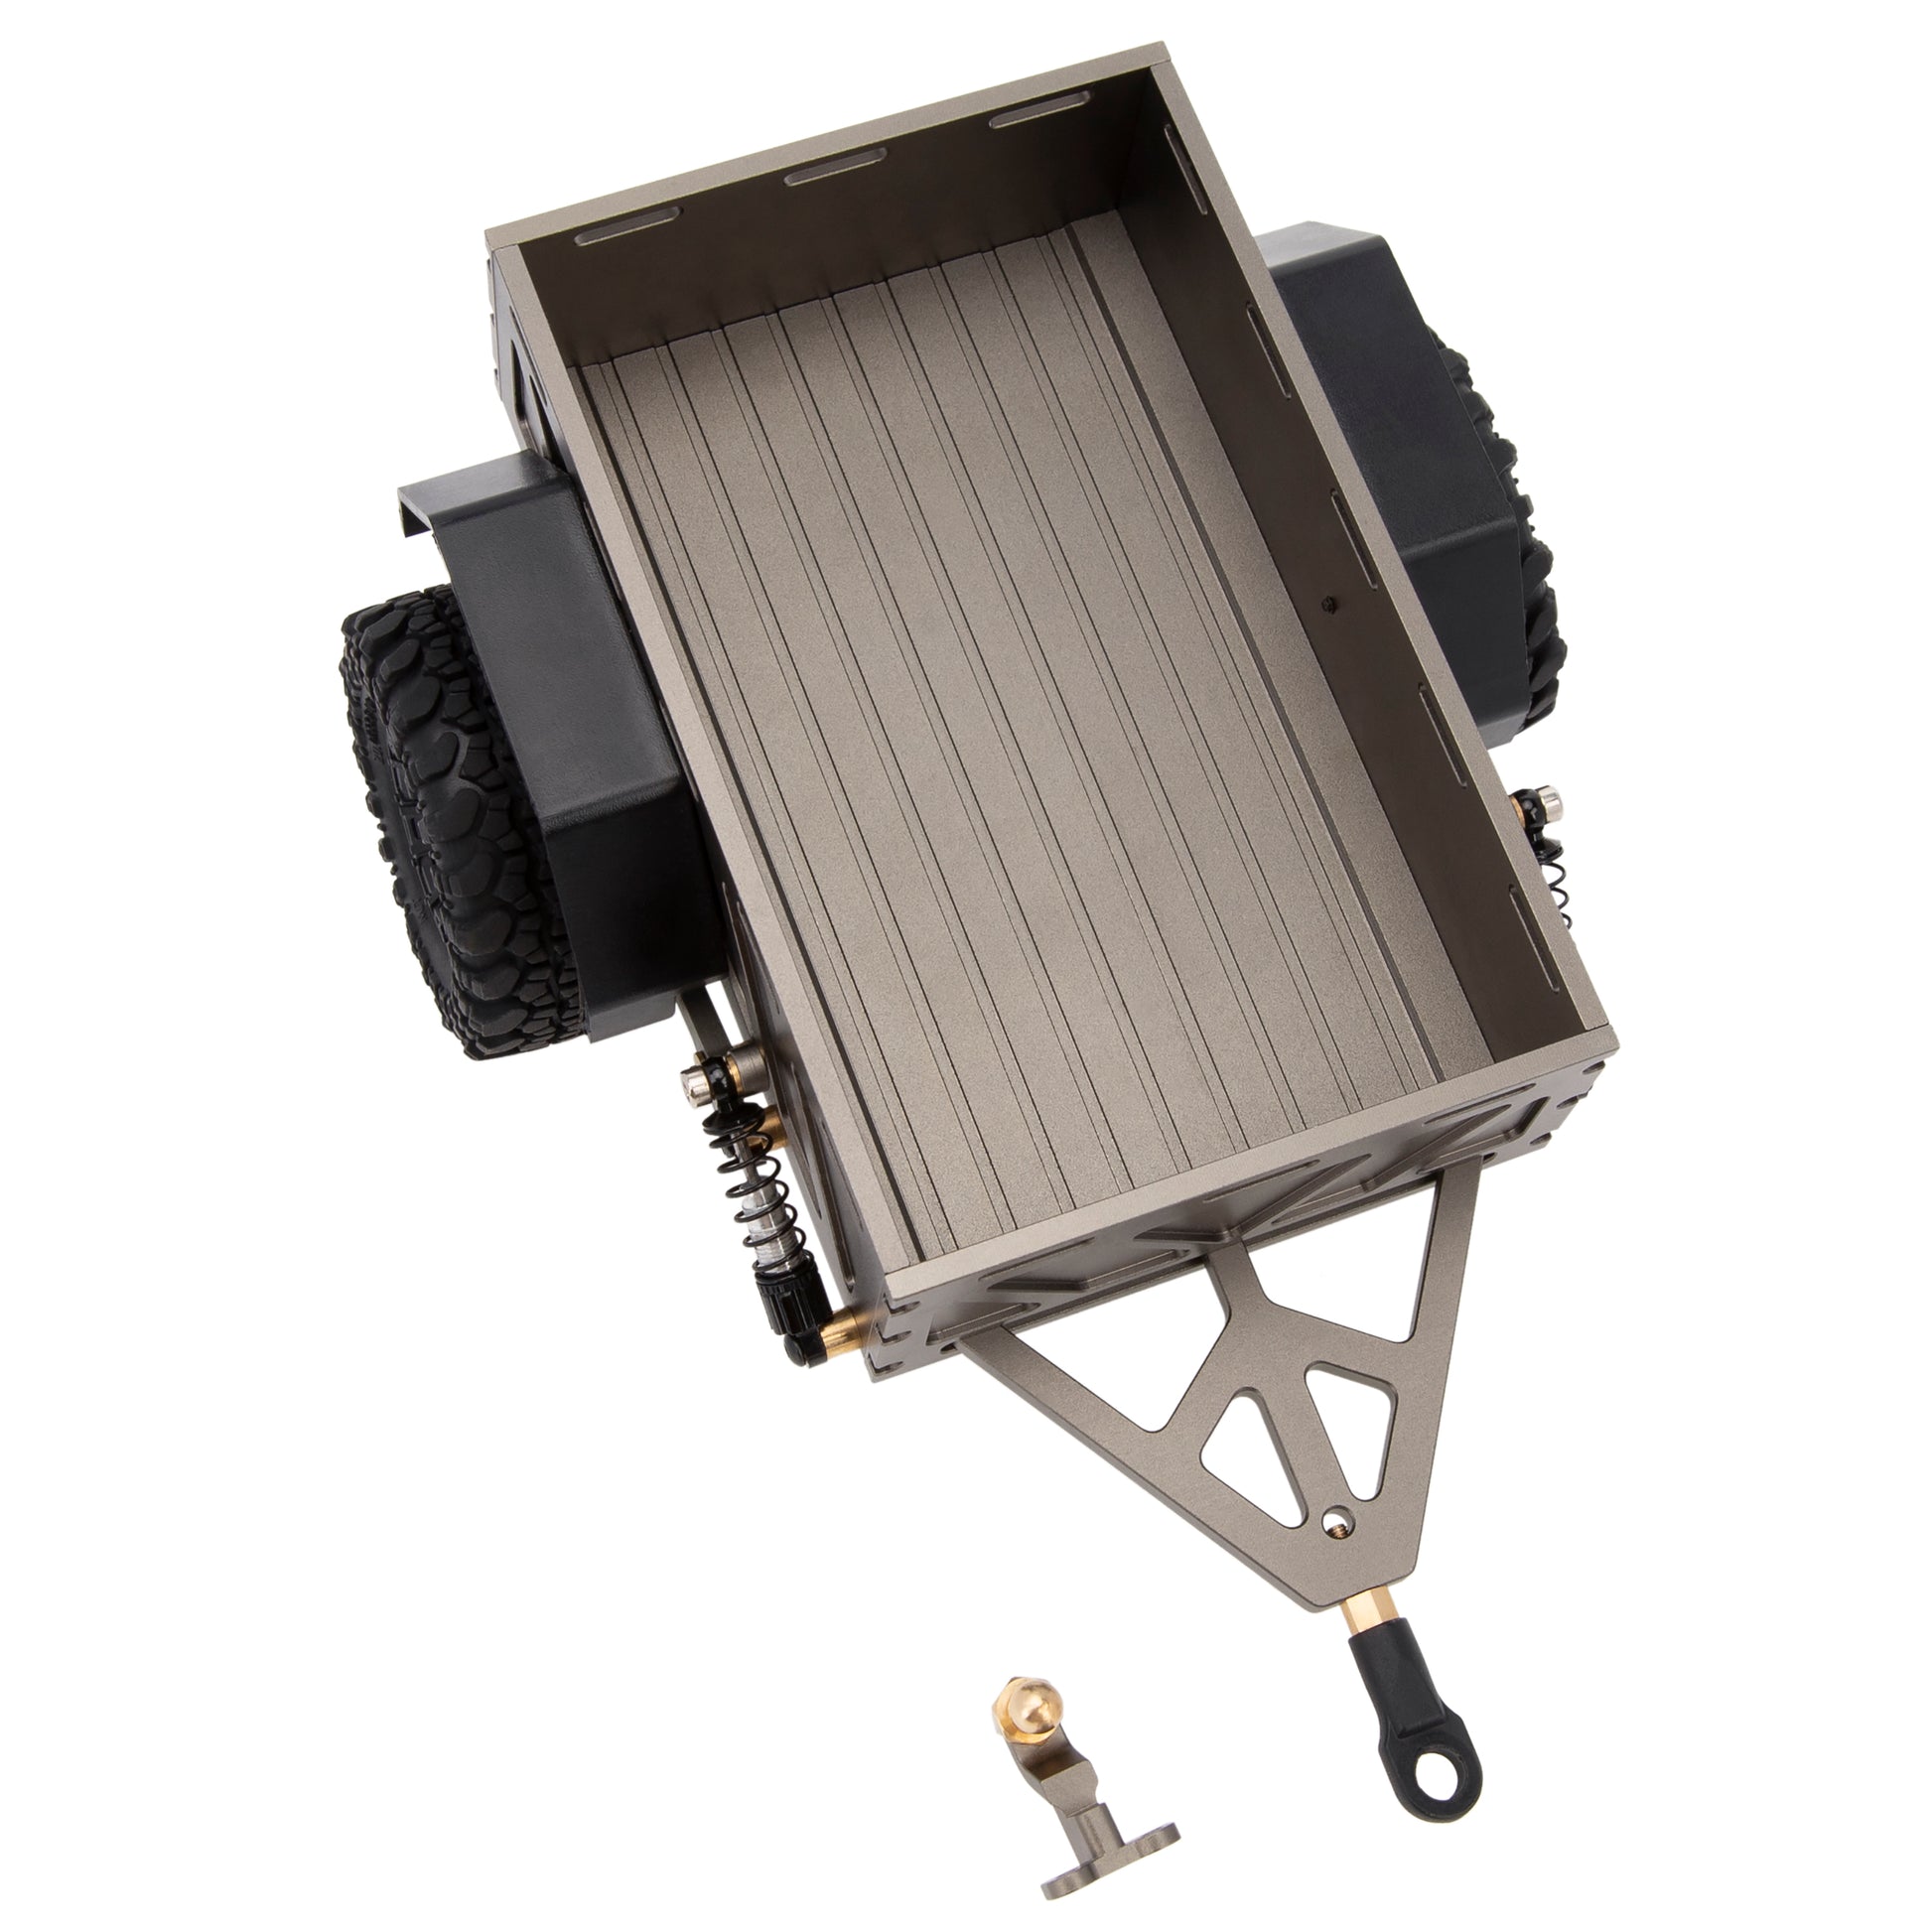 Coffee Utility trailer car with hitch for TRX4M